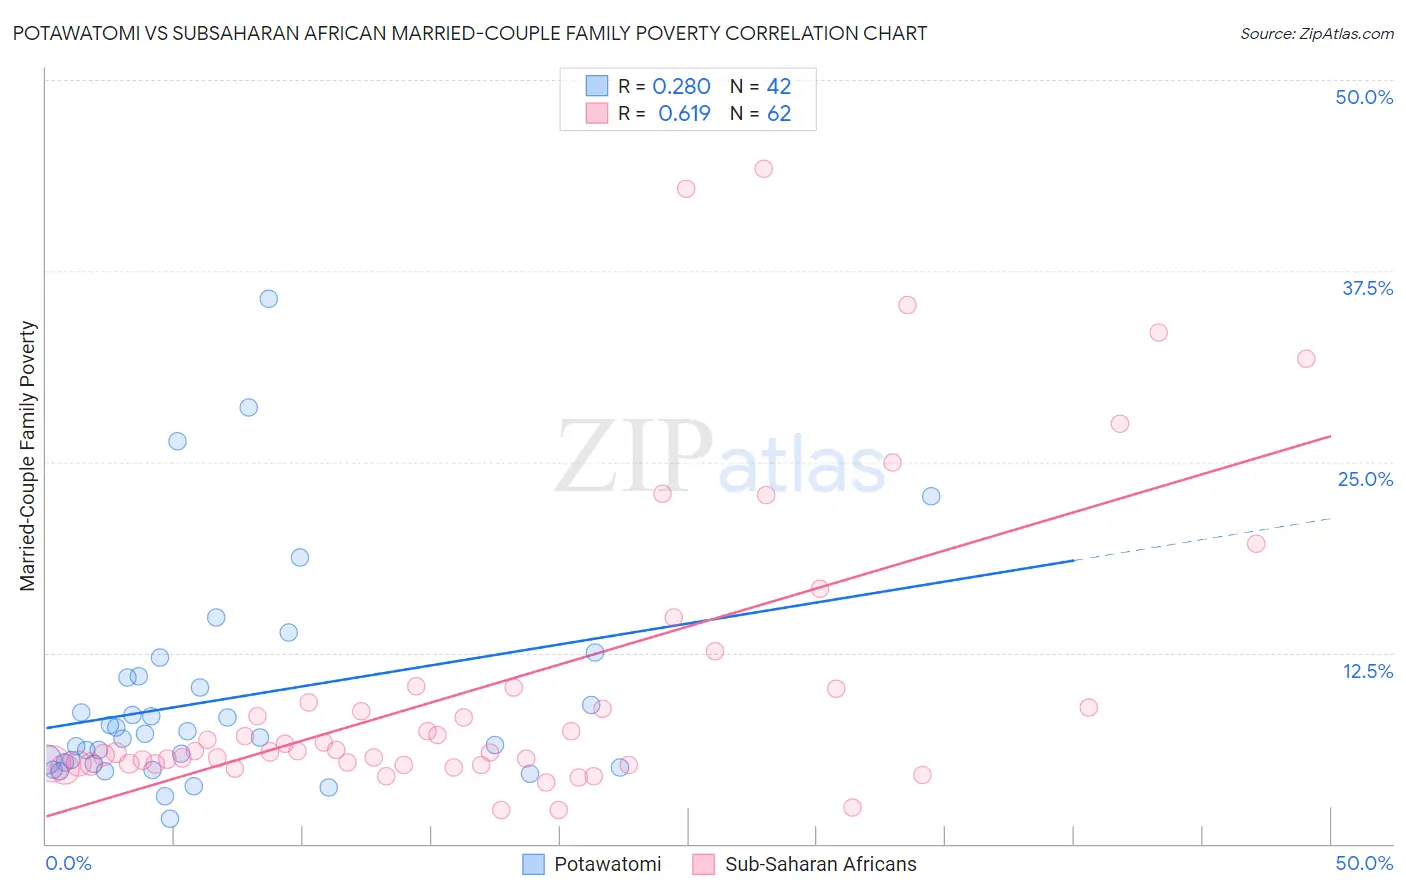 Potawatomi vs Subsaharan African Married-Couple Family Poverty